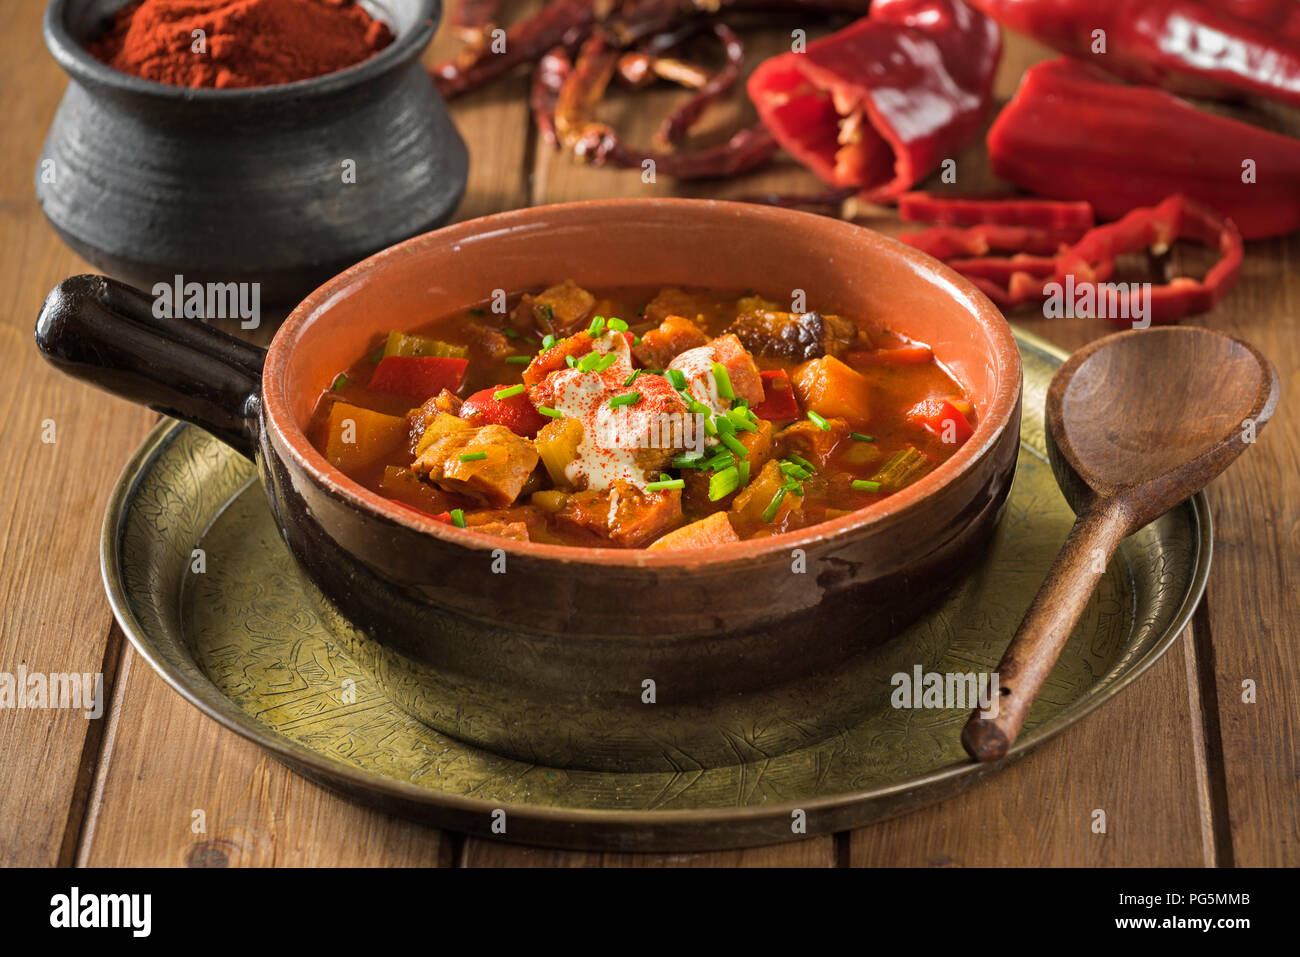 Goulash soup. Gulyásleves. Traditional Hungarian soup. Hungary Food Stock Photo